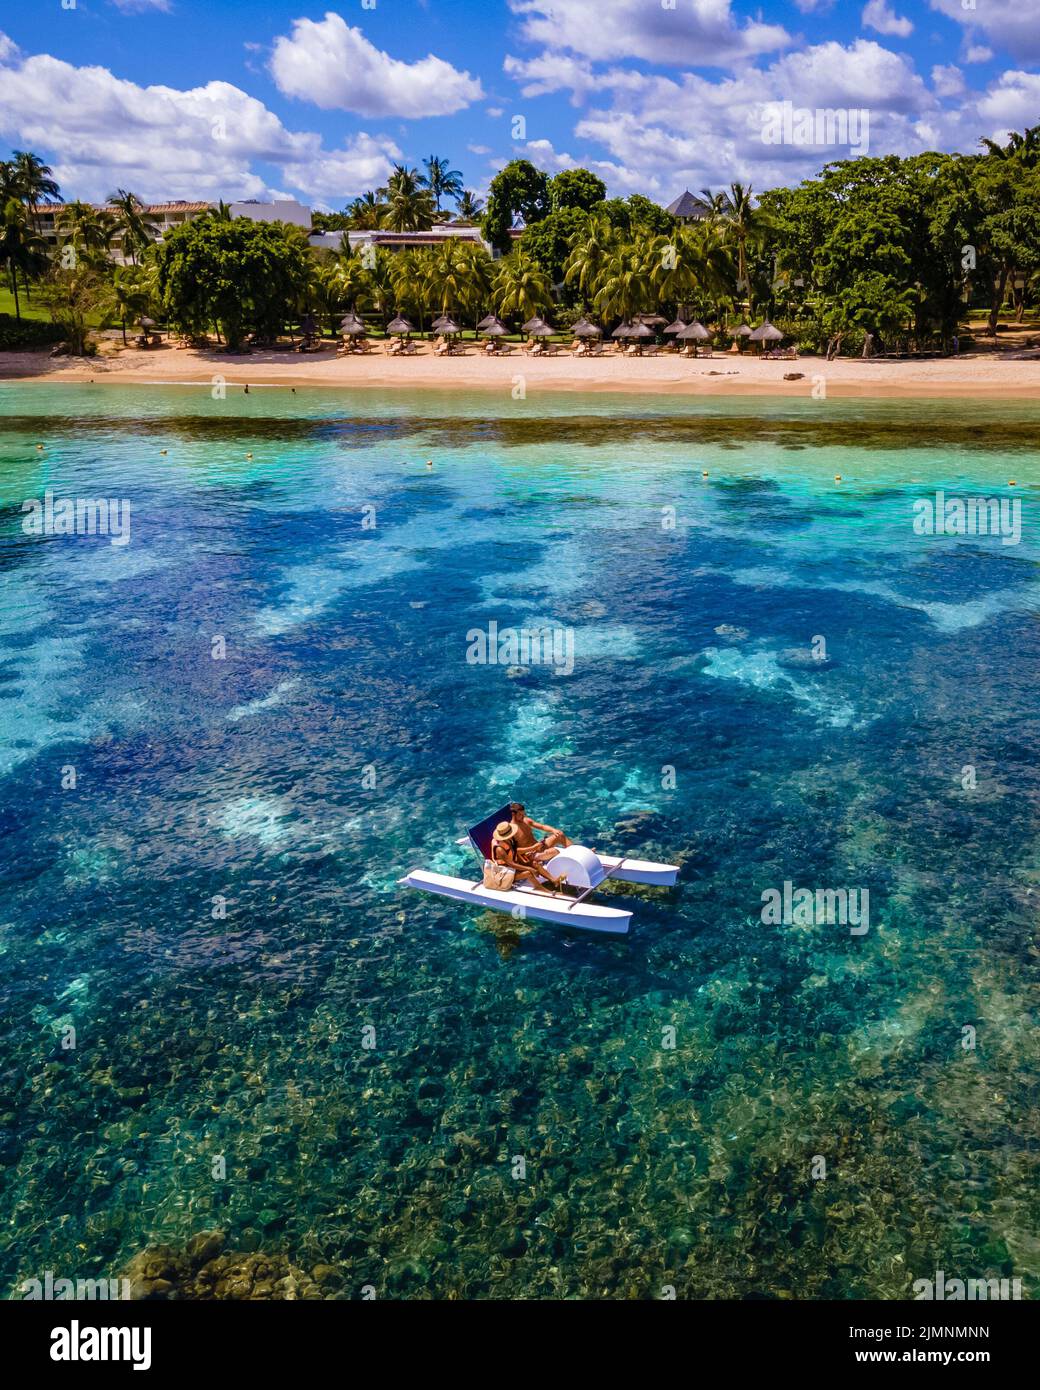 Paddle boards and pedalos on the idyllic palm fringed beach, couple men and woman on vacation Mauritius Stock Photo